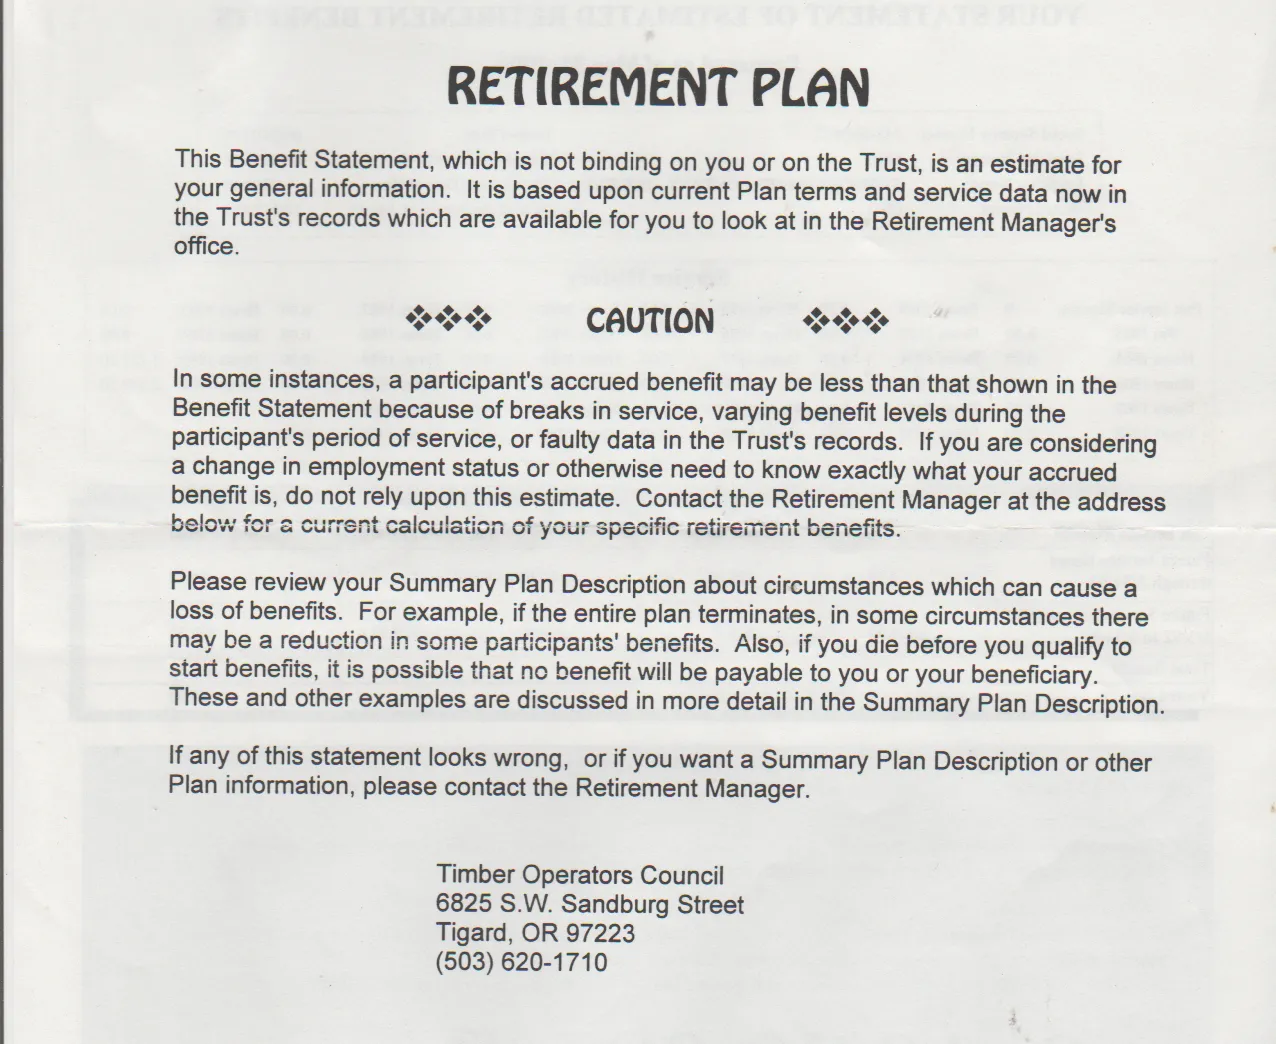 1996-05-31 - Friday - Stimson Lumber Company - Timber Operators Council Retirement Plan-2.png